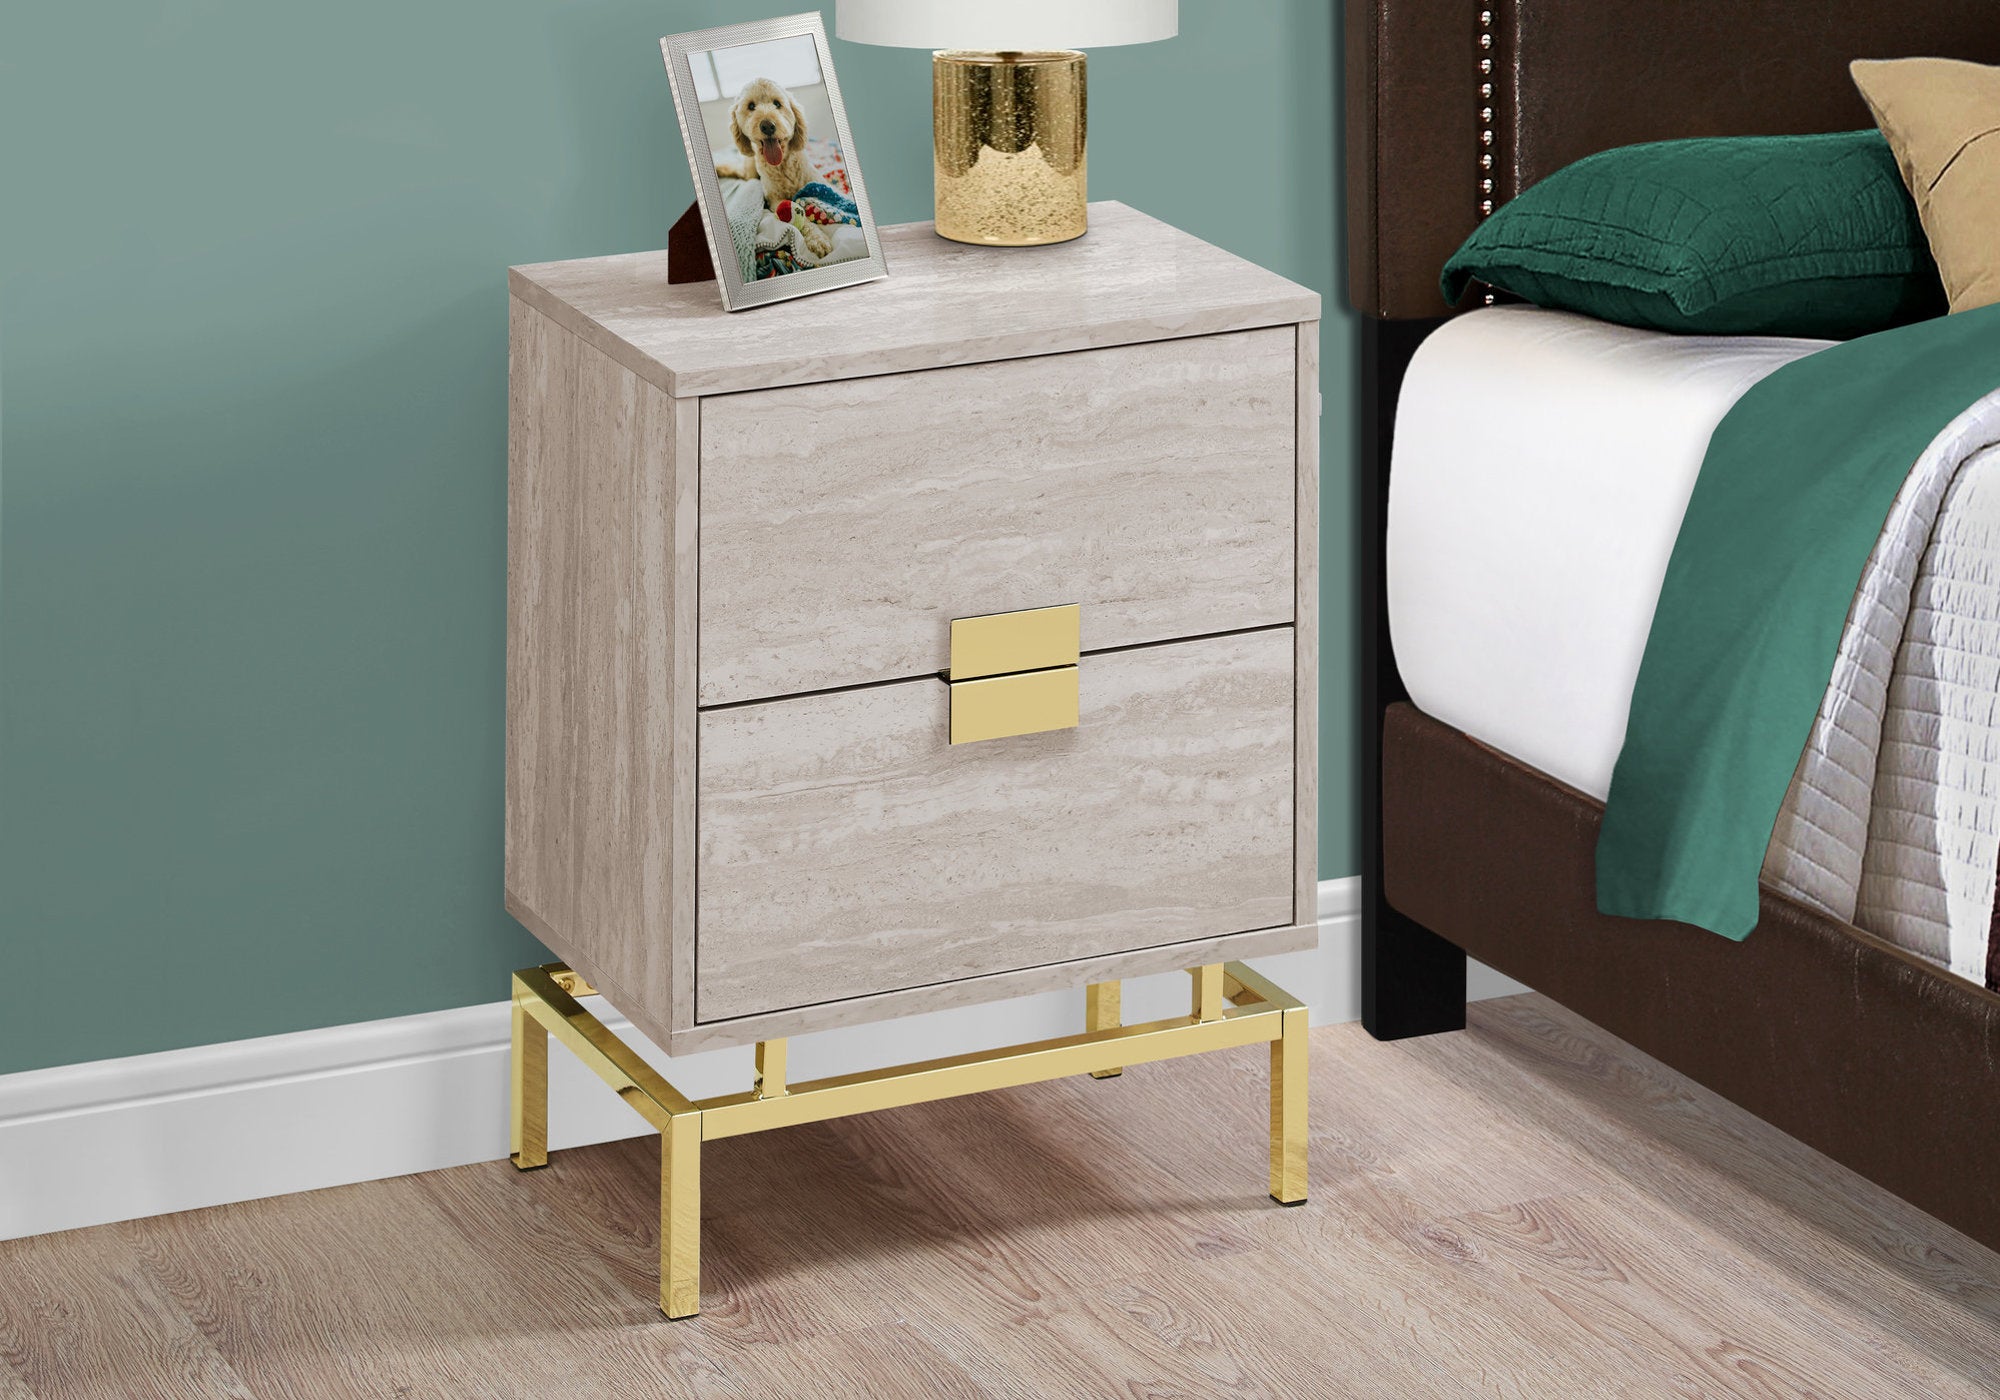 MN-953493    Accent Table, Side, End, Nightstand, Lamp, Living Room, Bedroom, Metal Legs, Laminate, Beige Marble, Gold, Contemporary, Modern